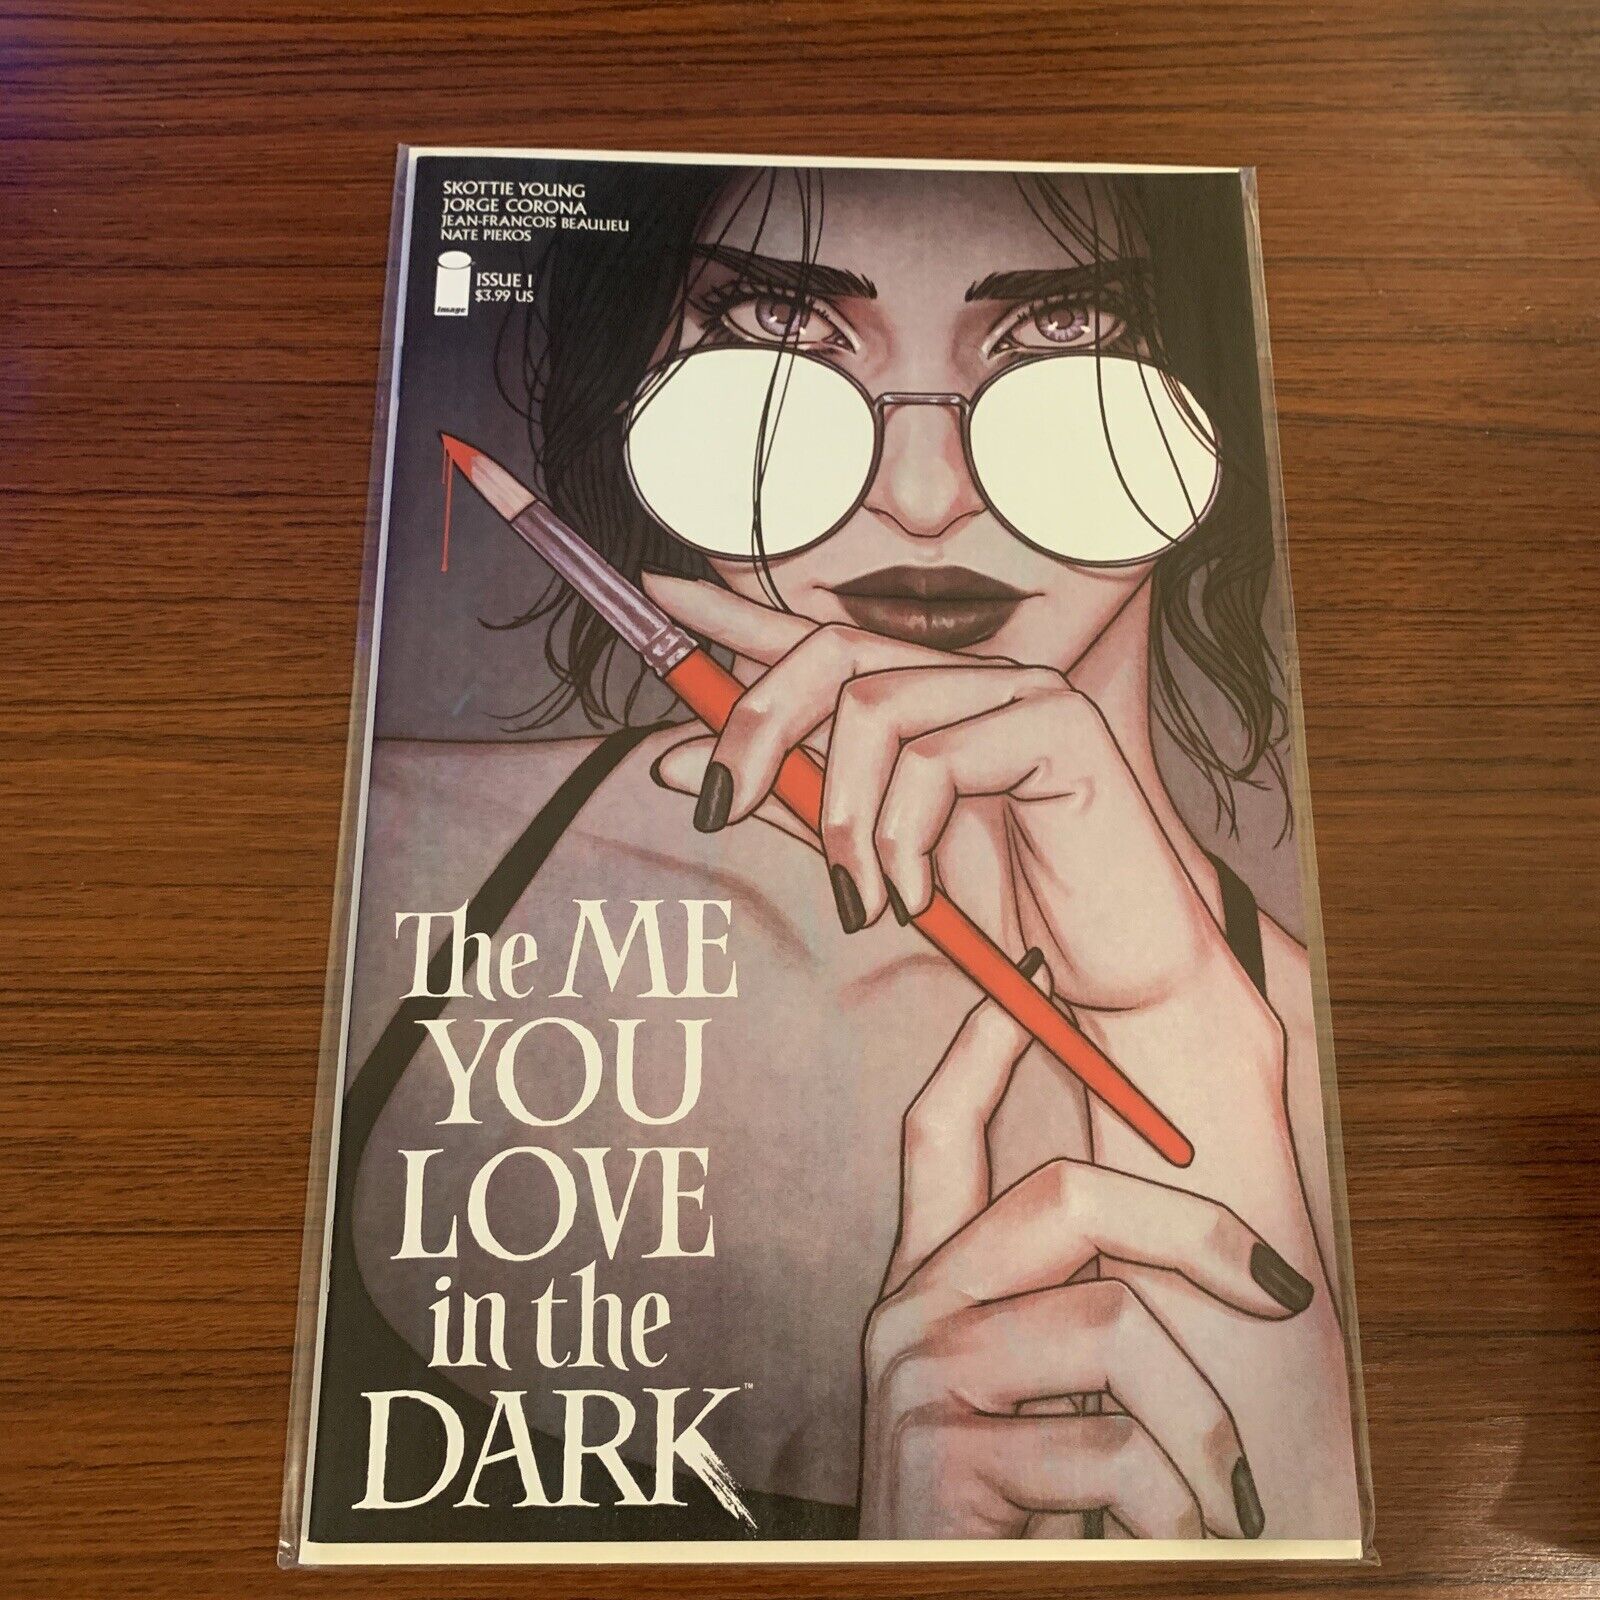 The ME YOU LOVE in the DARK #1/1st Print -Trade Dress EXCLUSIVE by JENNY FRISON